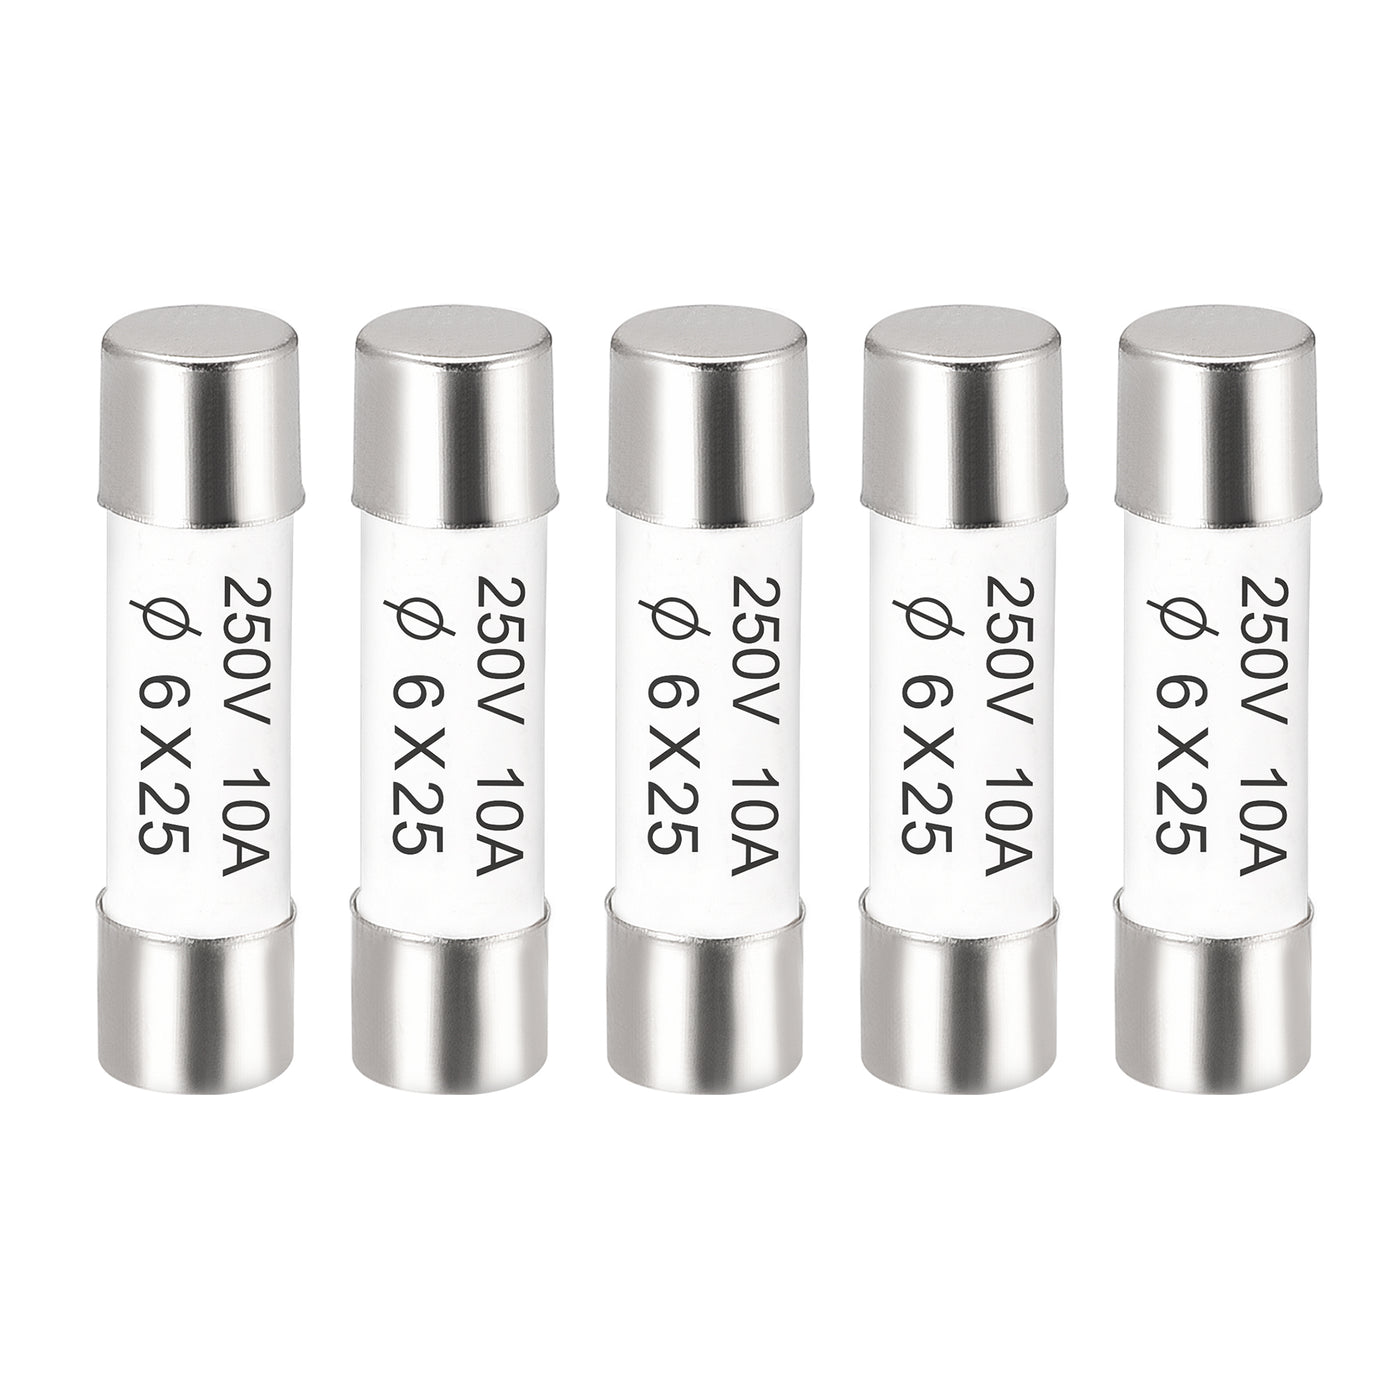 uxcell Uxcell Ceramic Cartridge Fuses 10A 250V 6x25mm Fast Blow for Energy Saving Lamp 5pcs